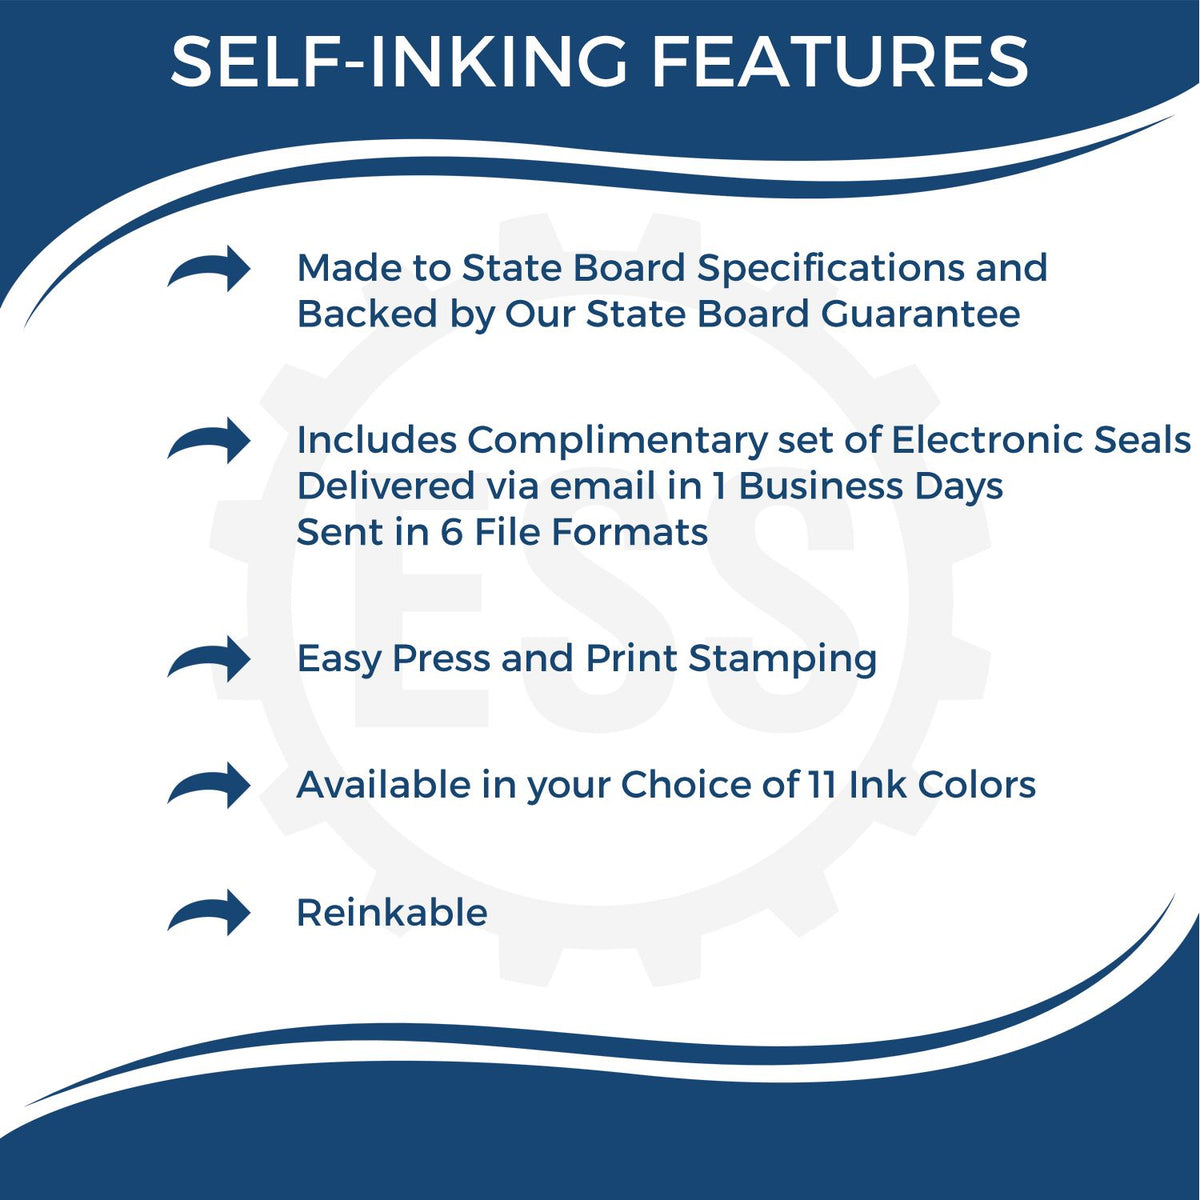 A picture of an infographic highlighting the selling points for the Self-Inking Rectangular Oregon Notary Stamp